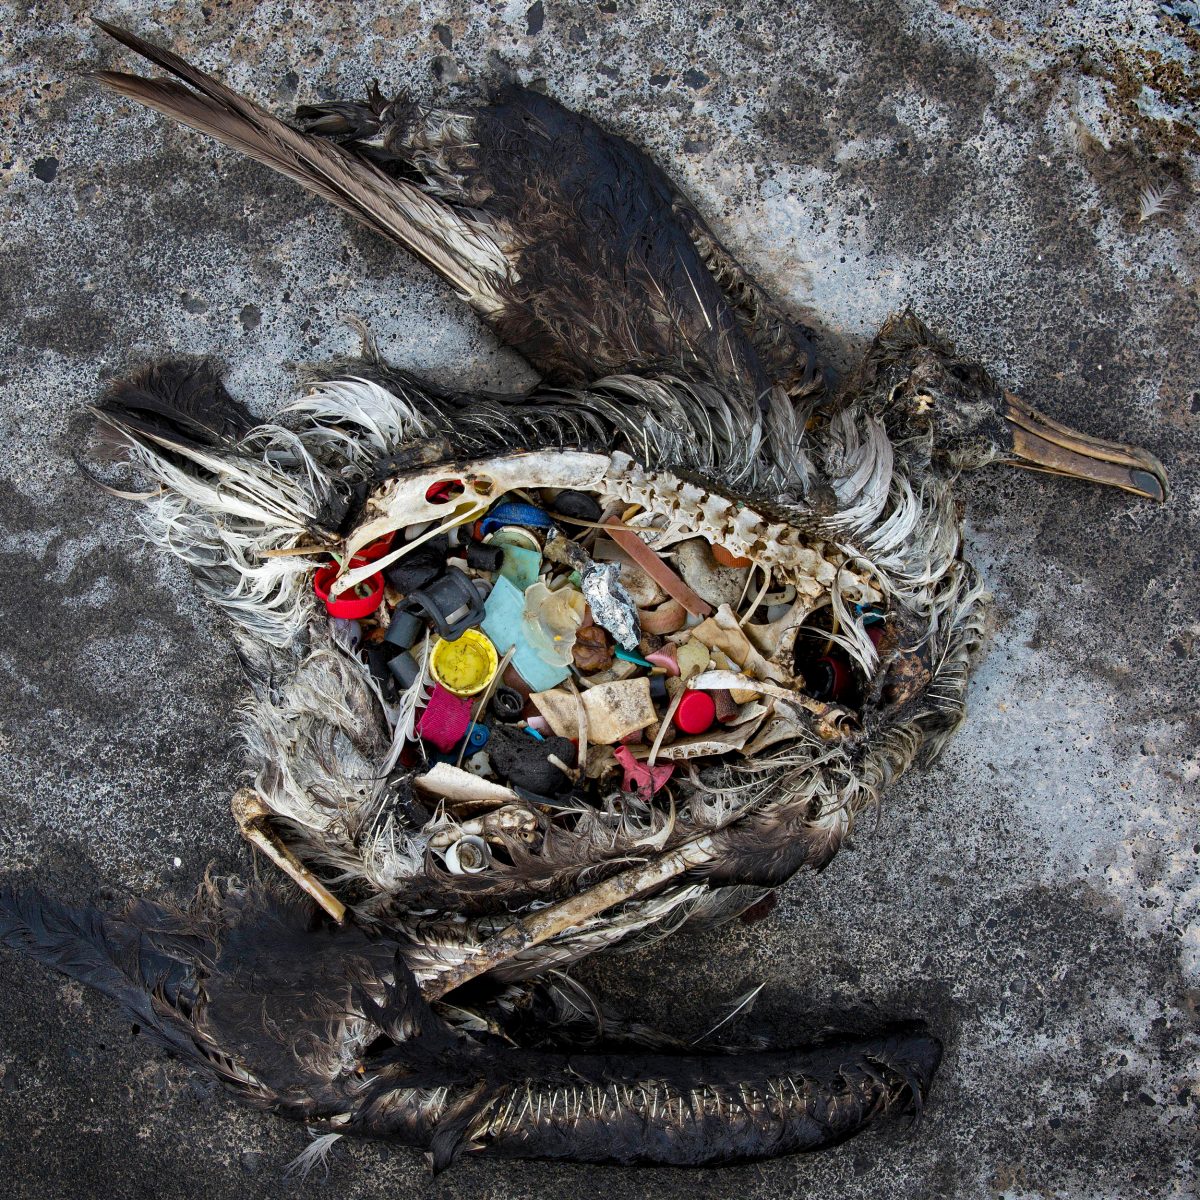 A dead black-footed albatross chick with plastics in its stomach